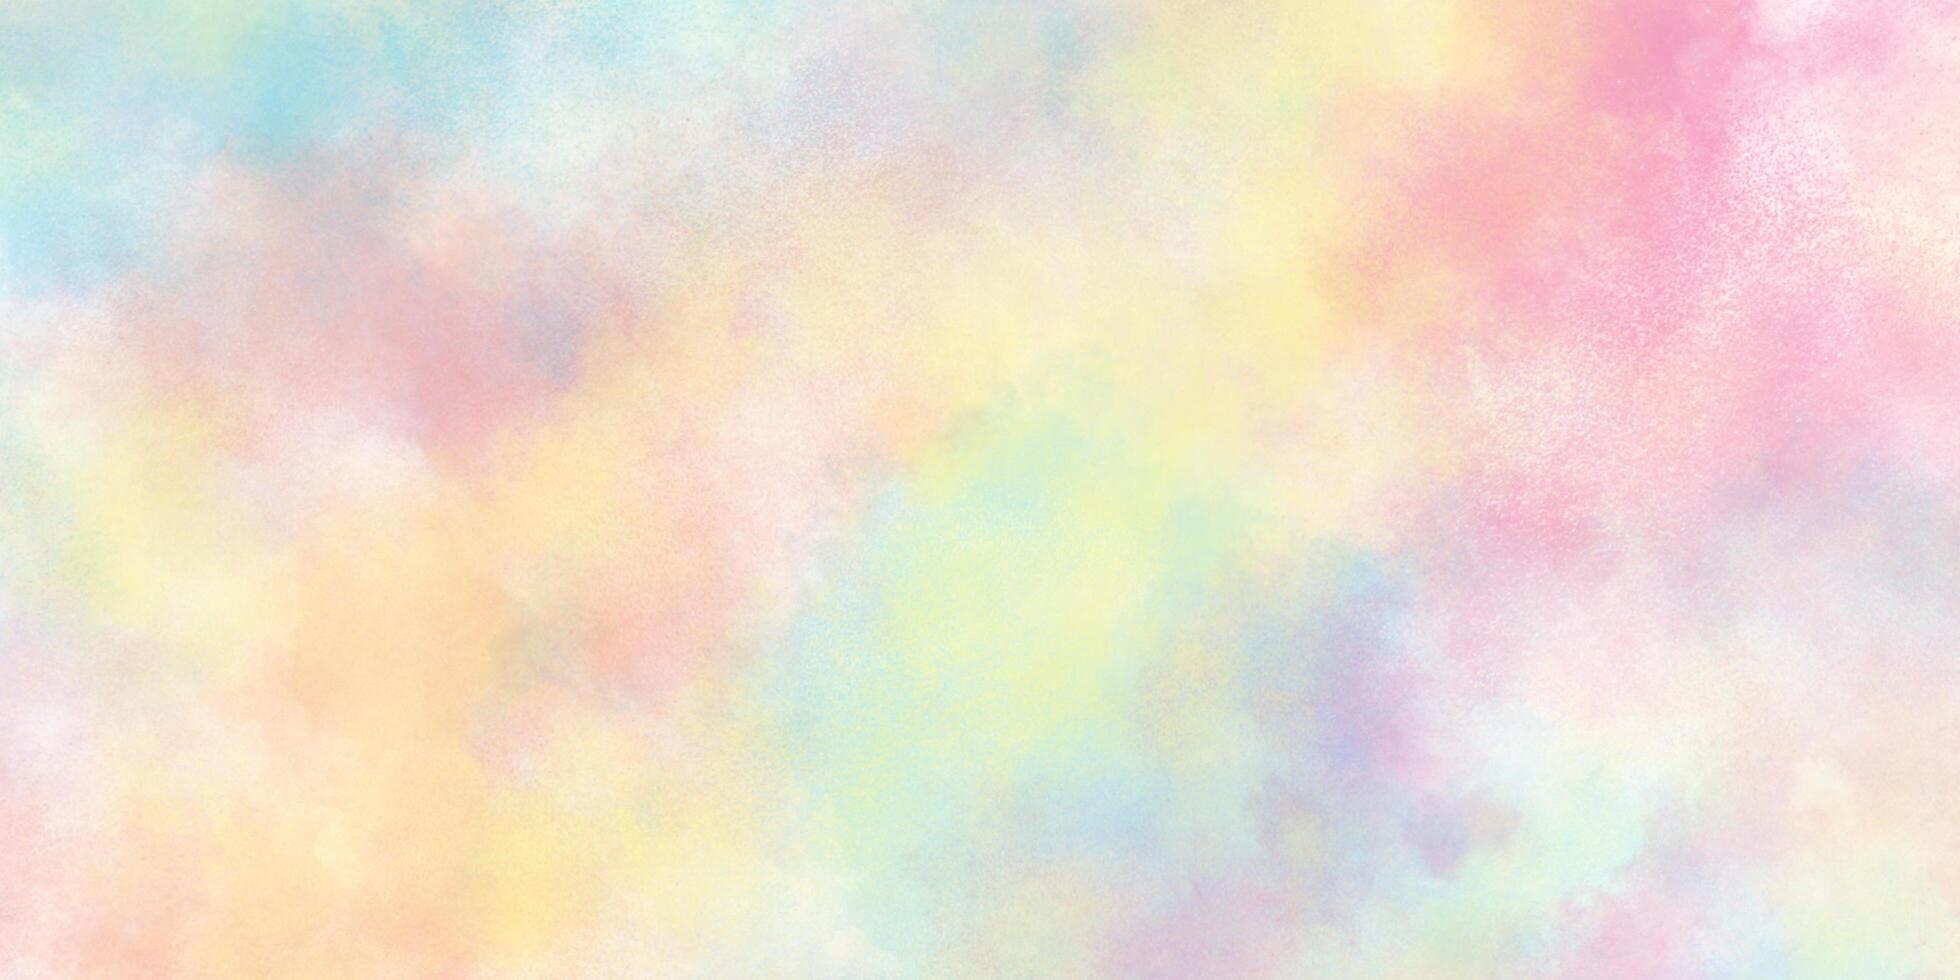 Artistic colorful brush-painted watercolor painting on empty canvas, colorful Pastel colored grunge watercolor texture, colorful paint splash or blotch background with bleed wash and stains. photo